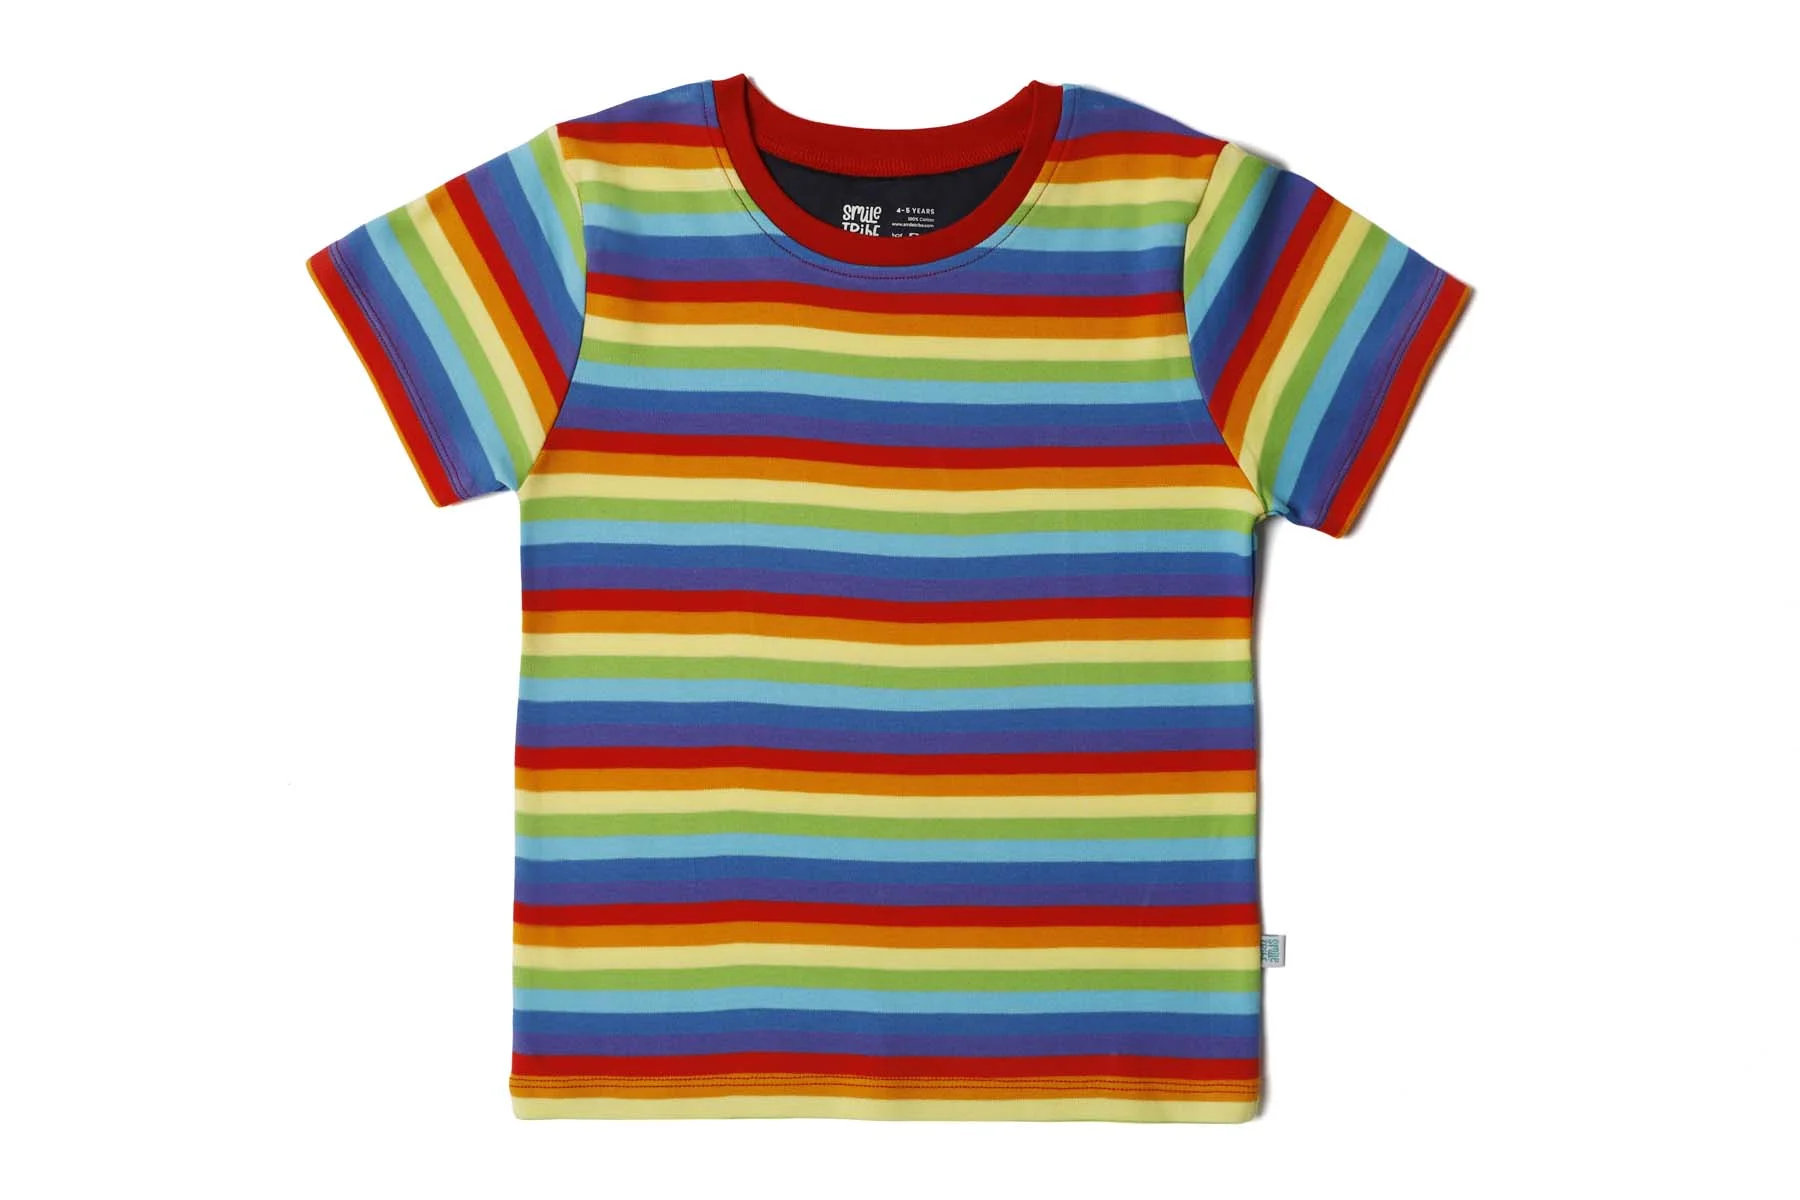 - Prices Rainbow T-shirt Premium Kids Great at Clothing